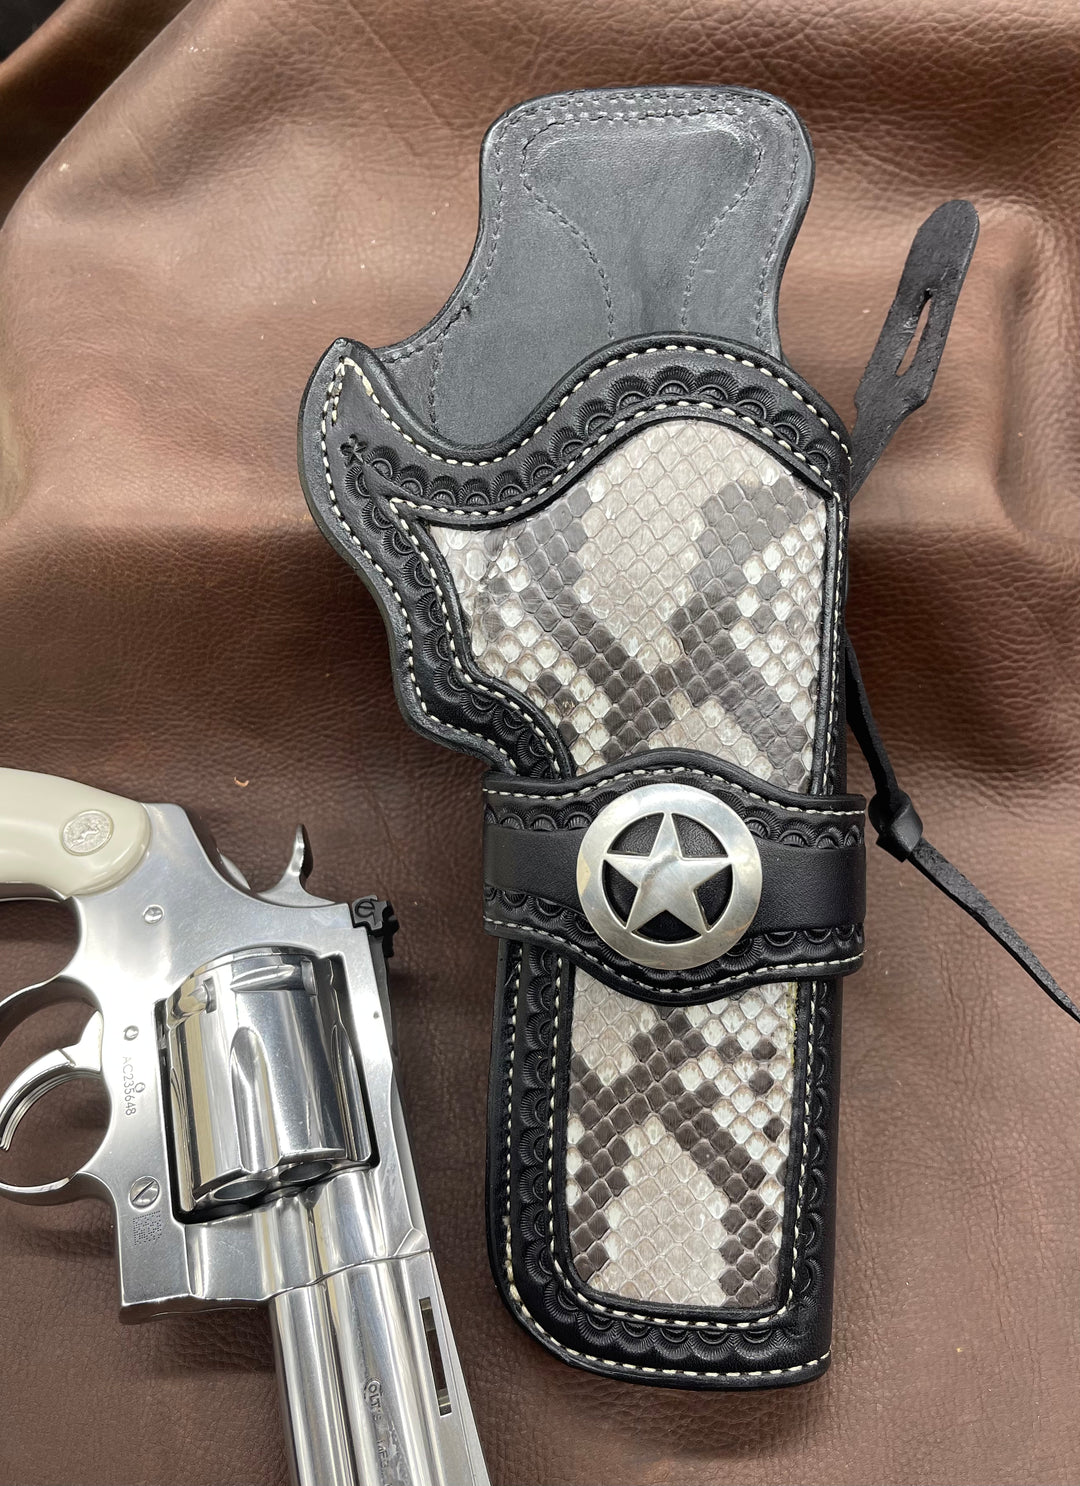 *Made to Order* LH/RH Paddle Rancher Cowboy Holster for Double Action Revolvers w/ Rattlesnake or Python Inlay & Texas Star Concho-Busted B Leather